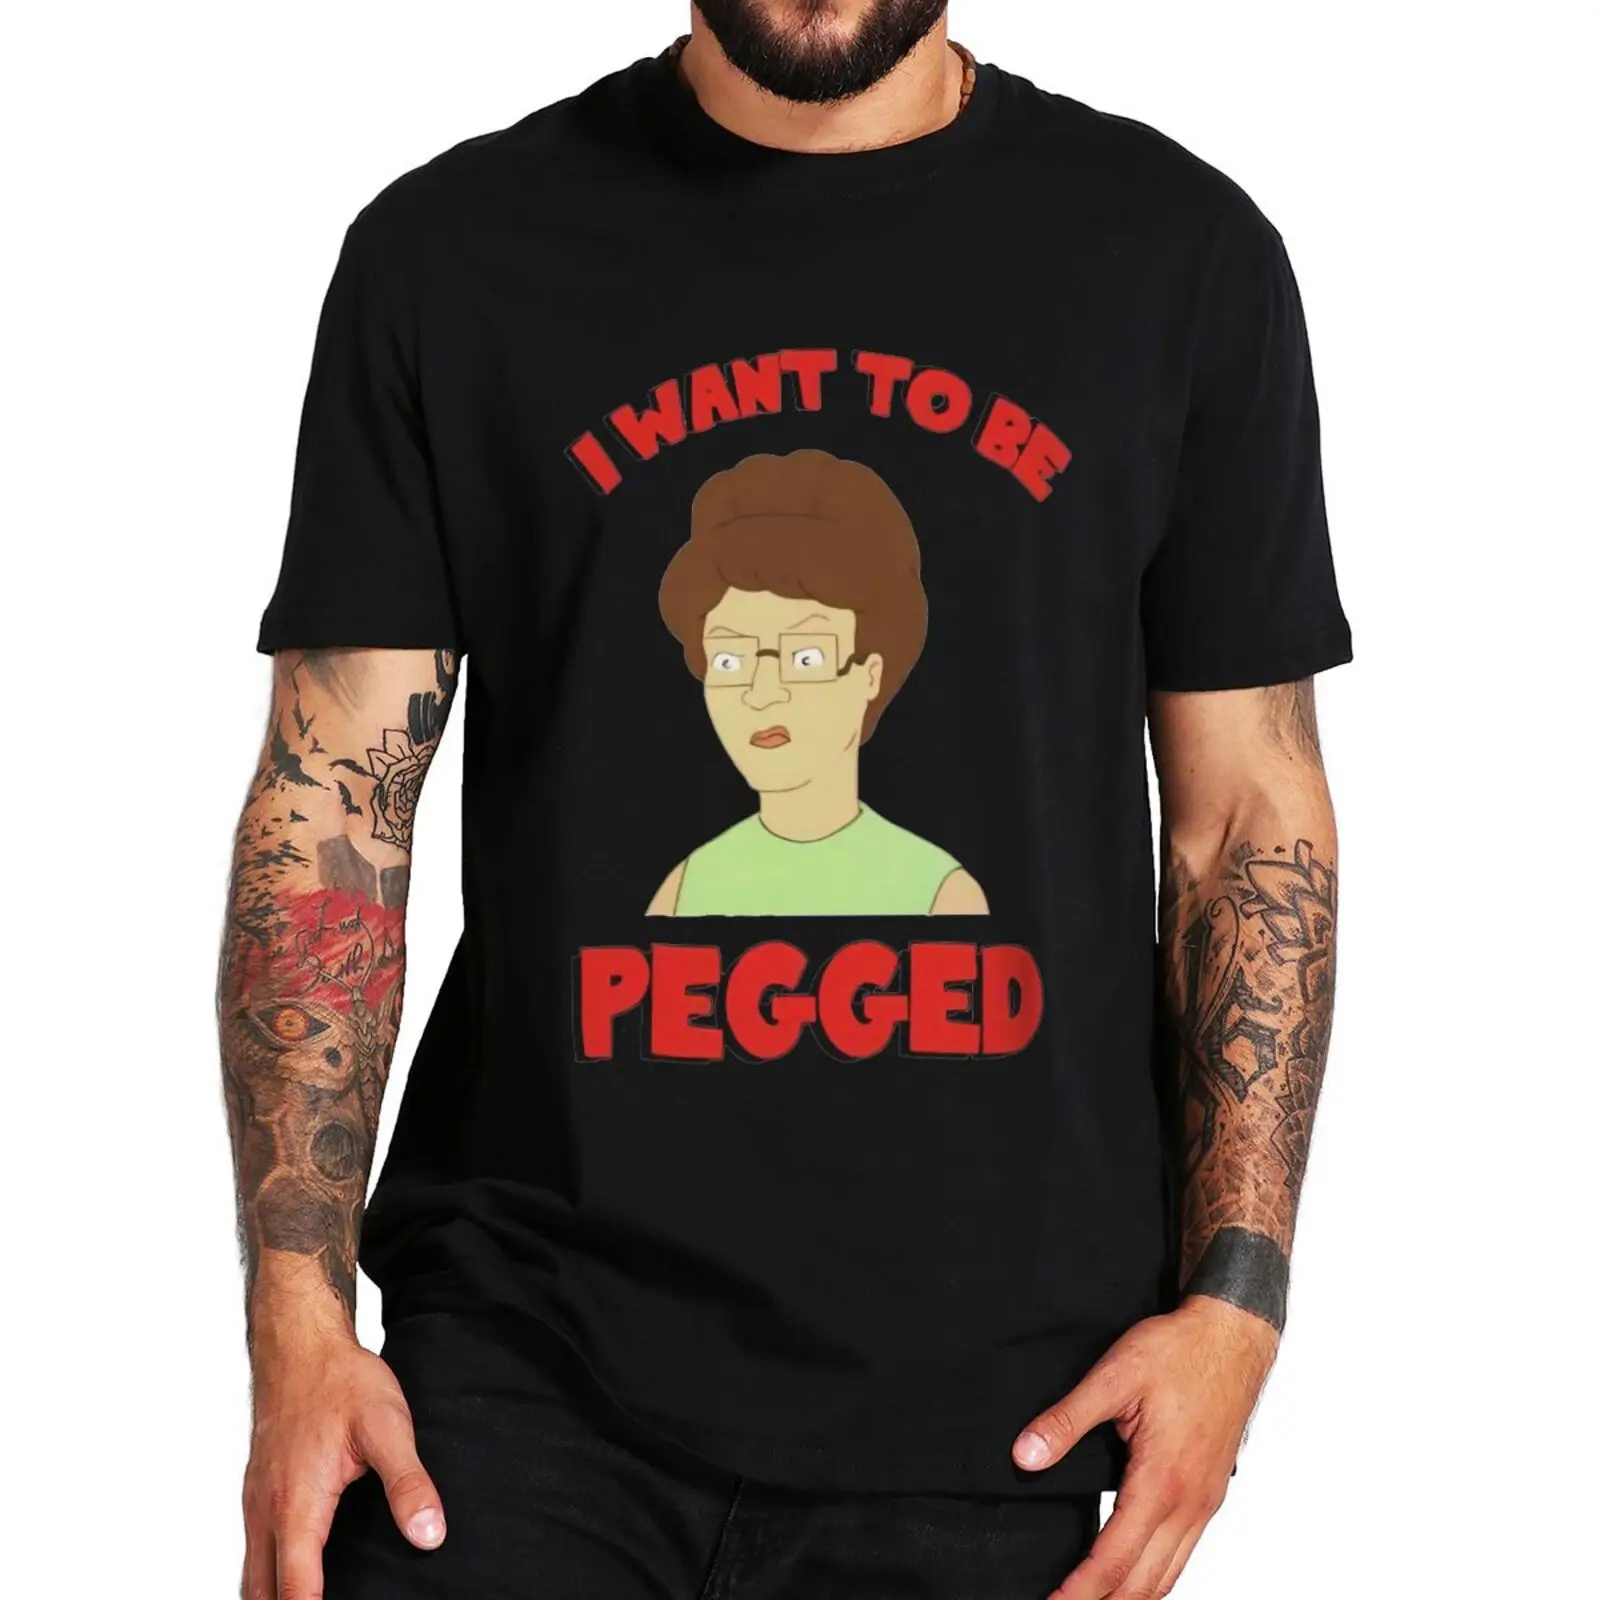 

I Want To Be Pegged T-shirt Funny Meme Adult Humor Hipster Short Sleeve Summer Casual 100% Cotton Unisex O-neck T Shirts EU Size